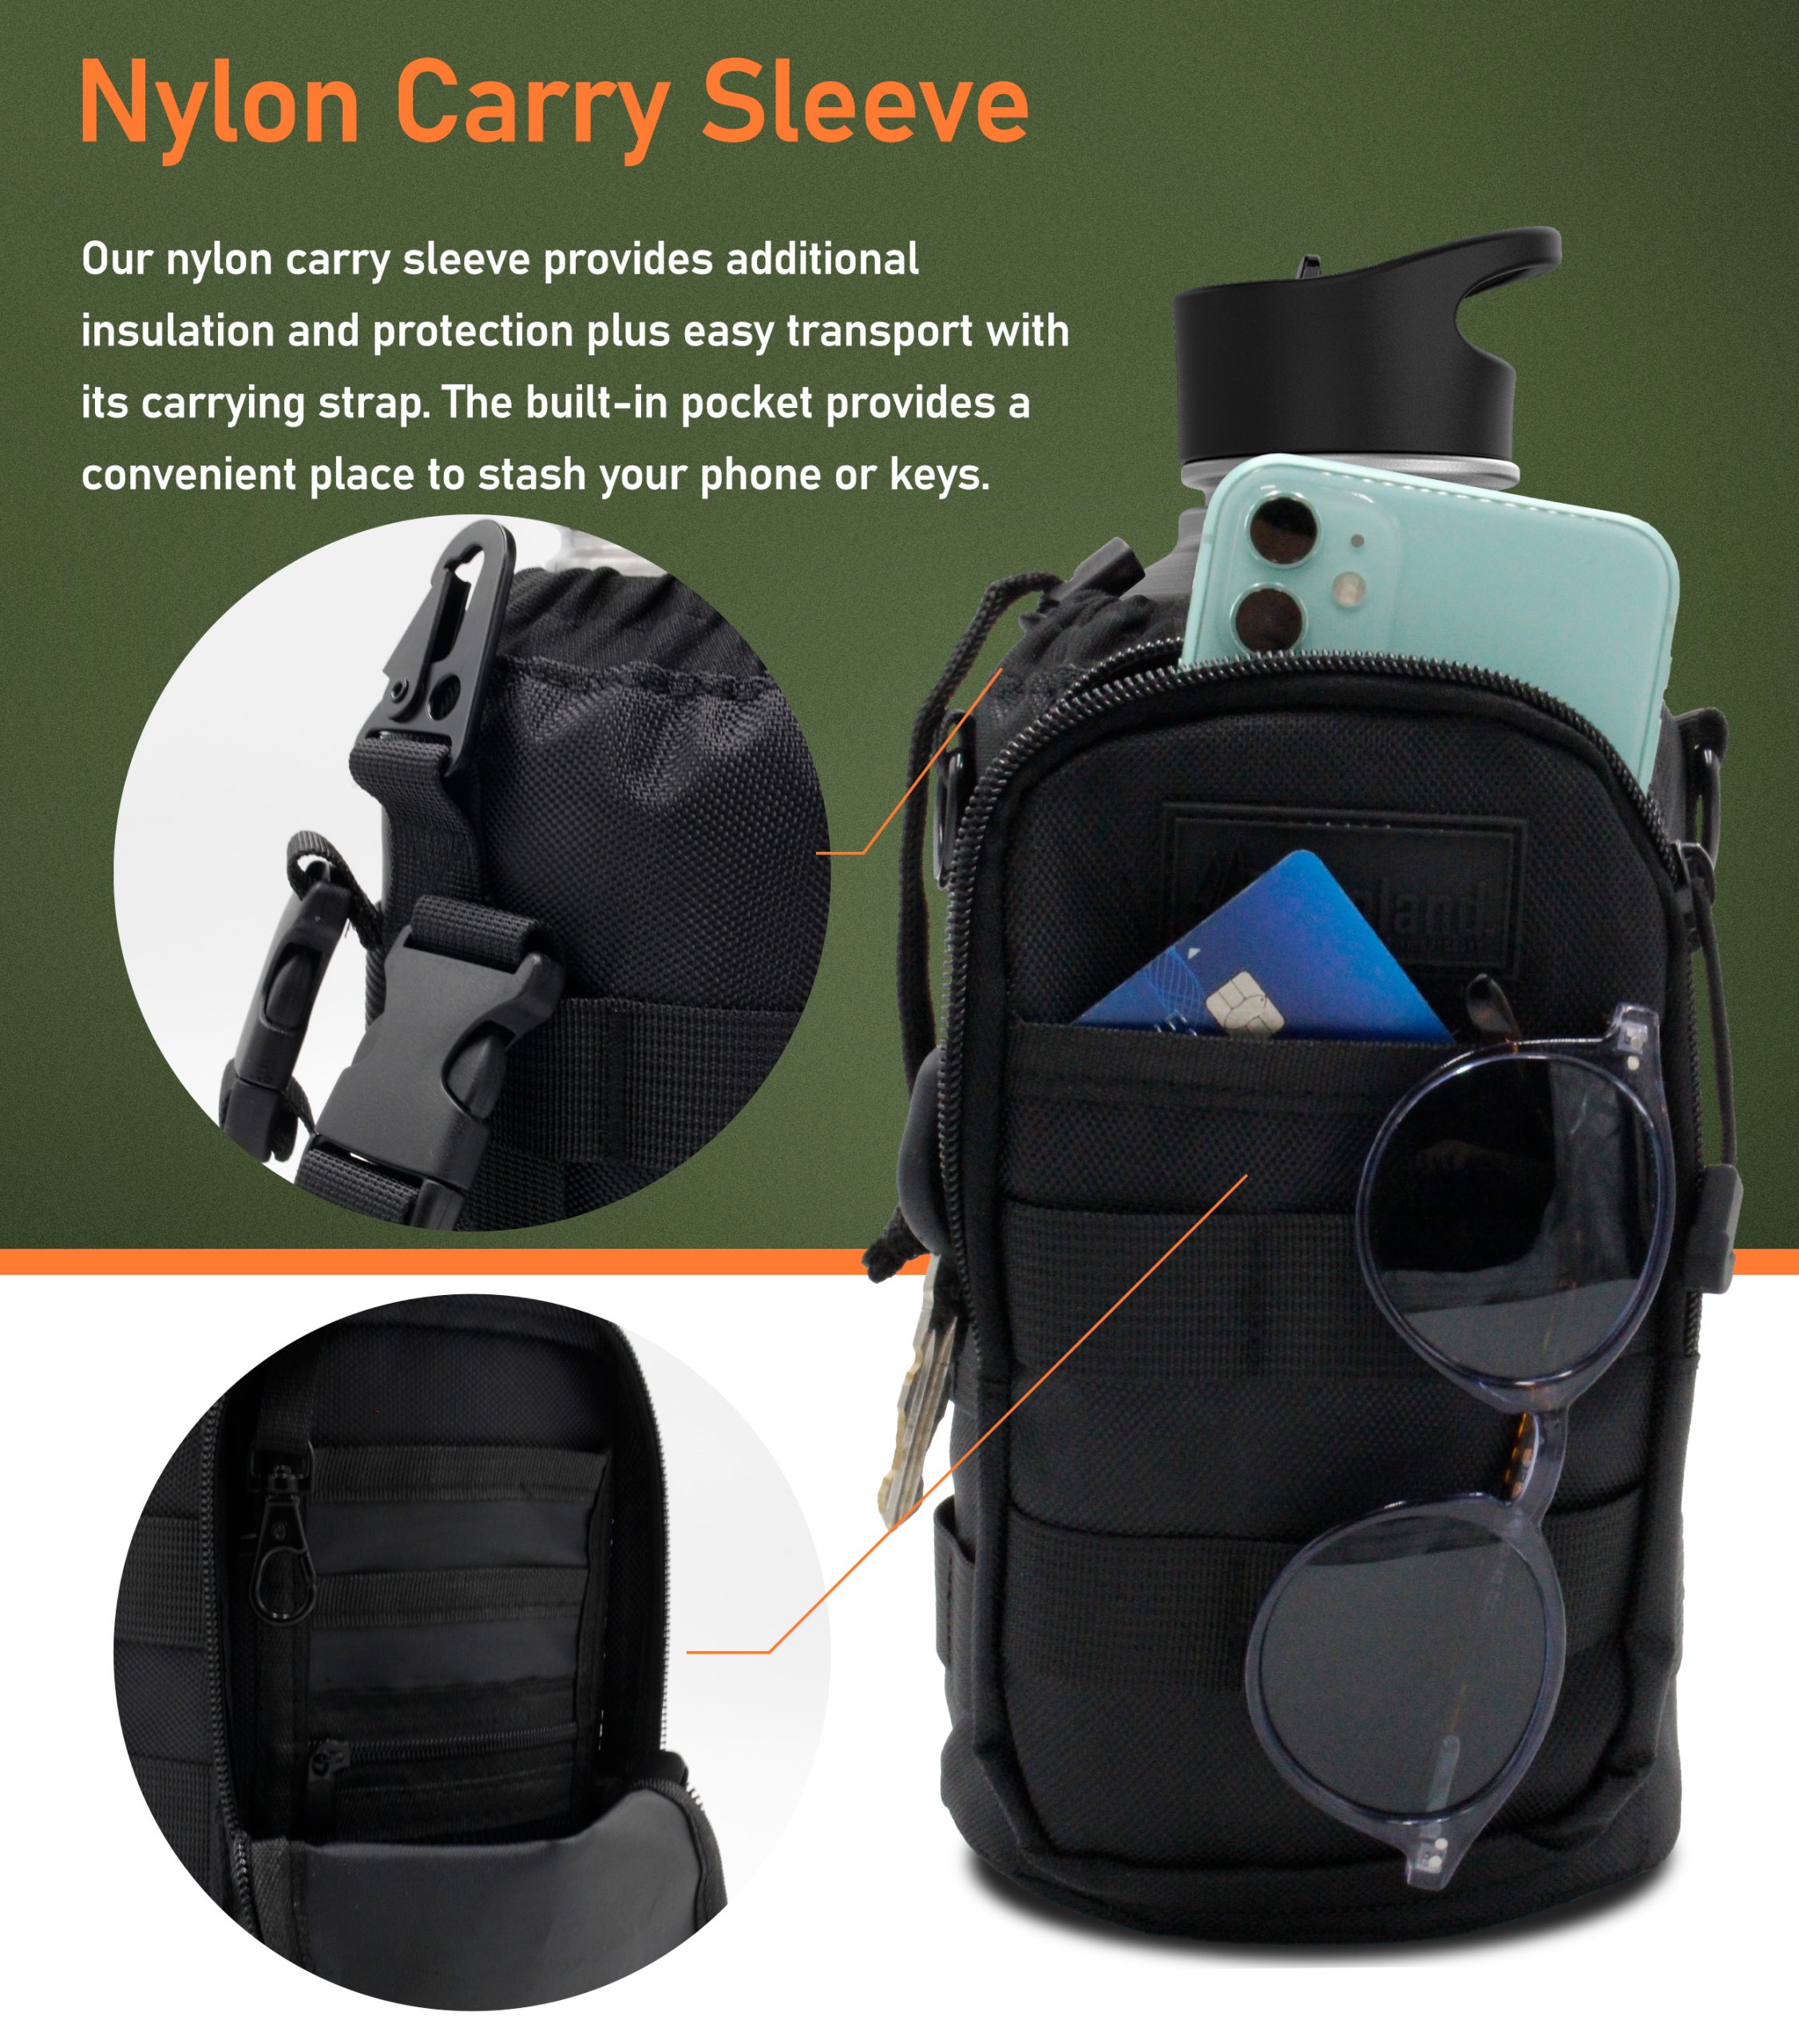 Protector Plus Tactical Water Bottle Pouch